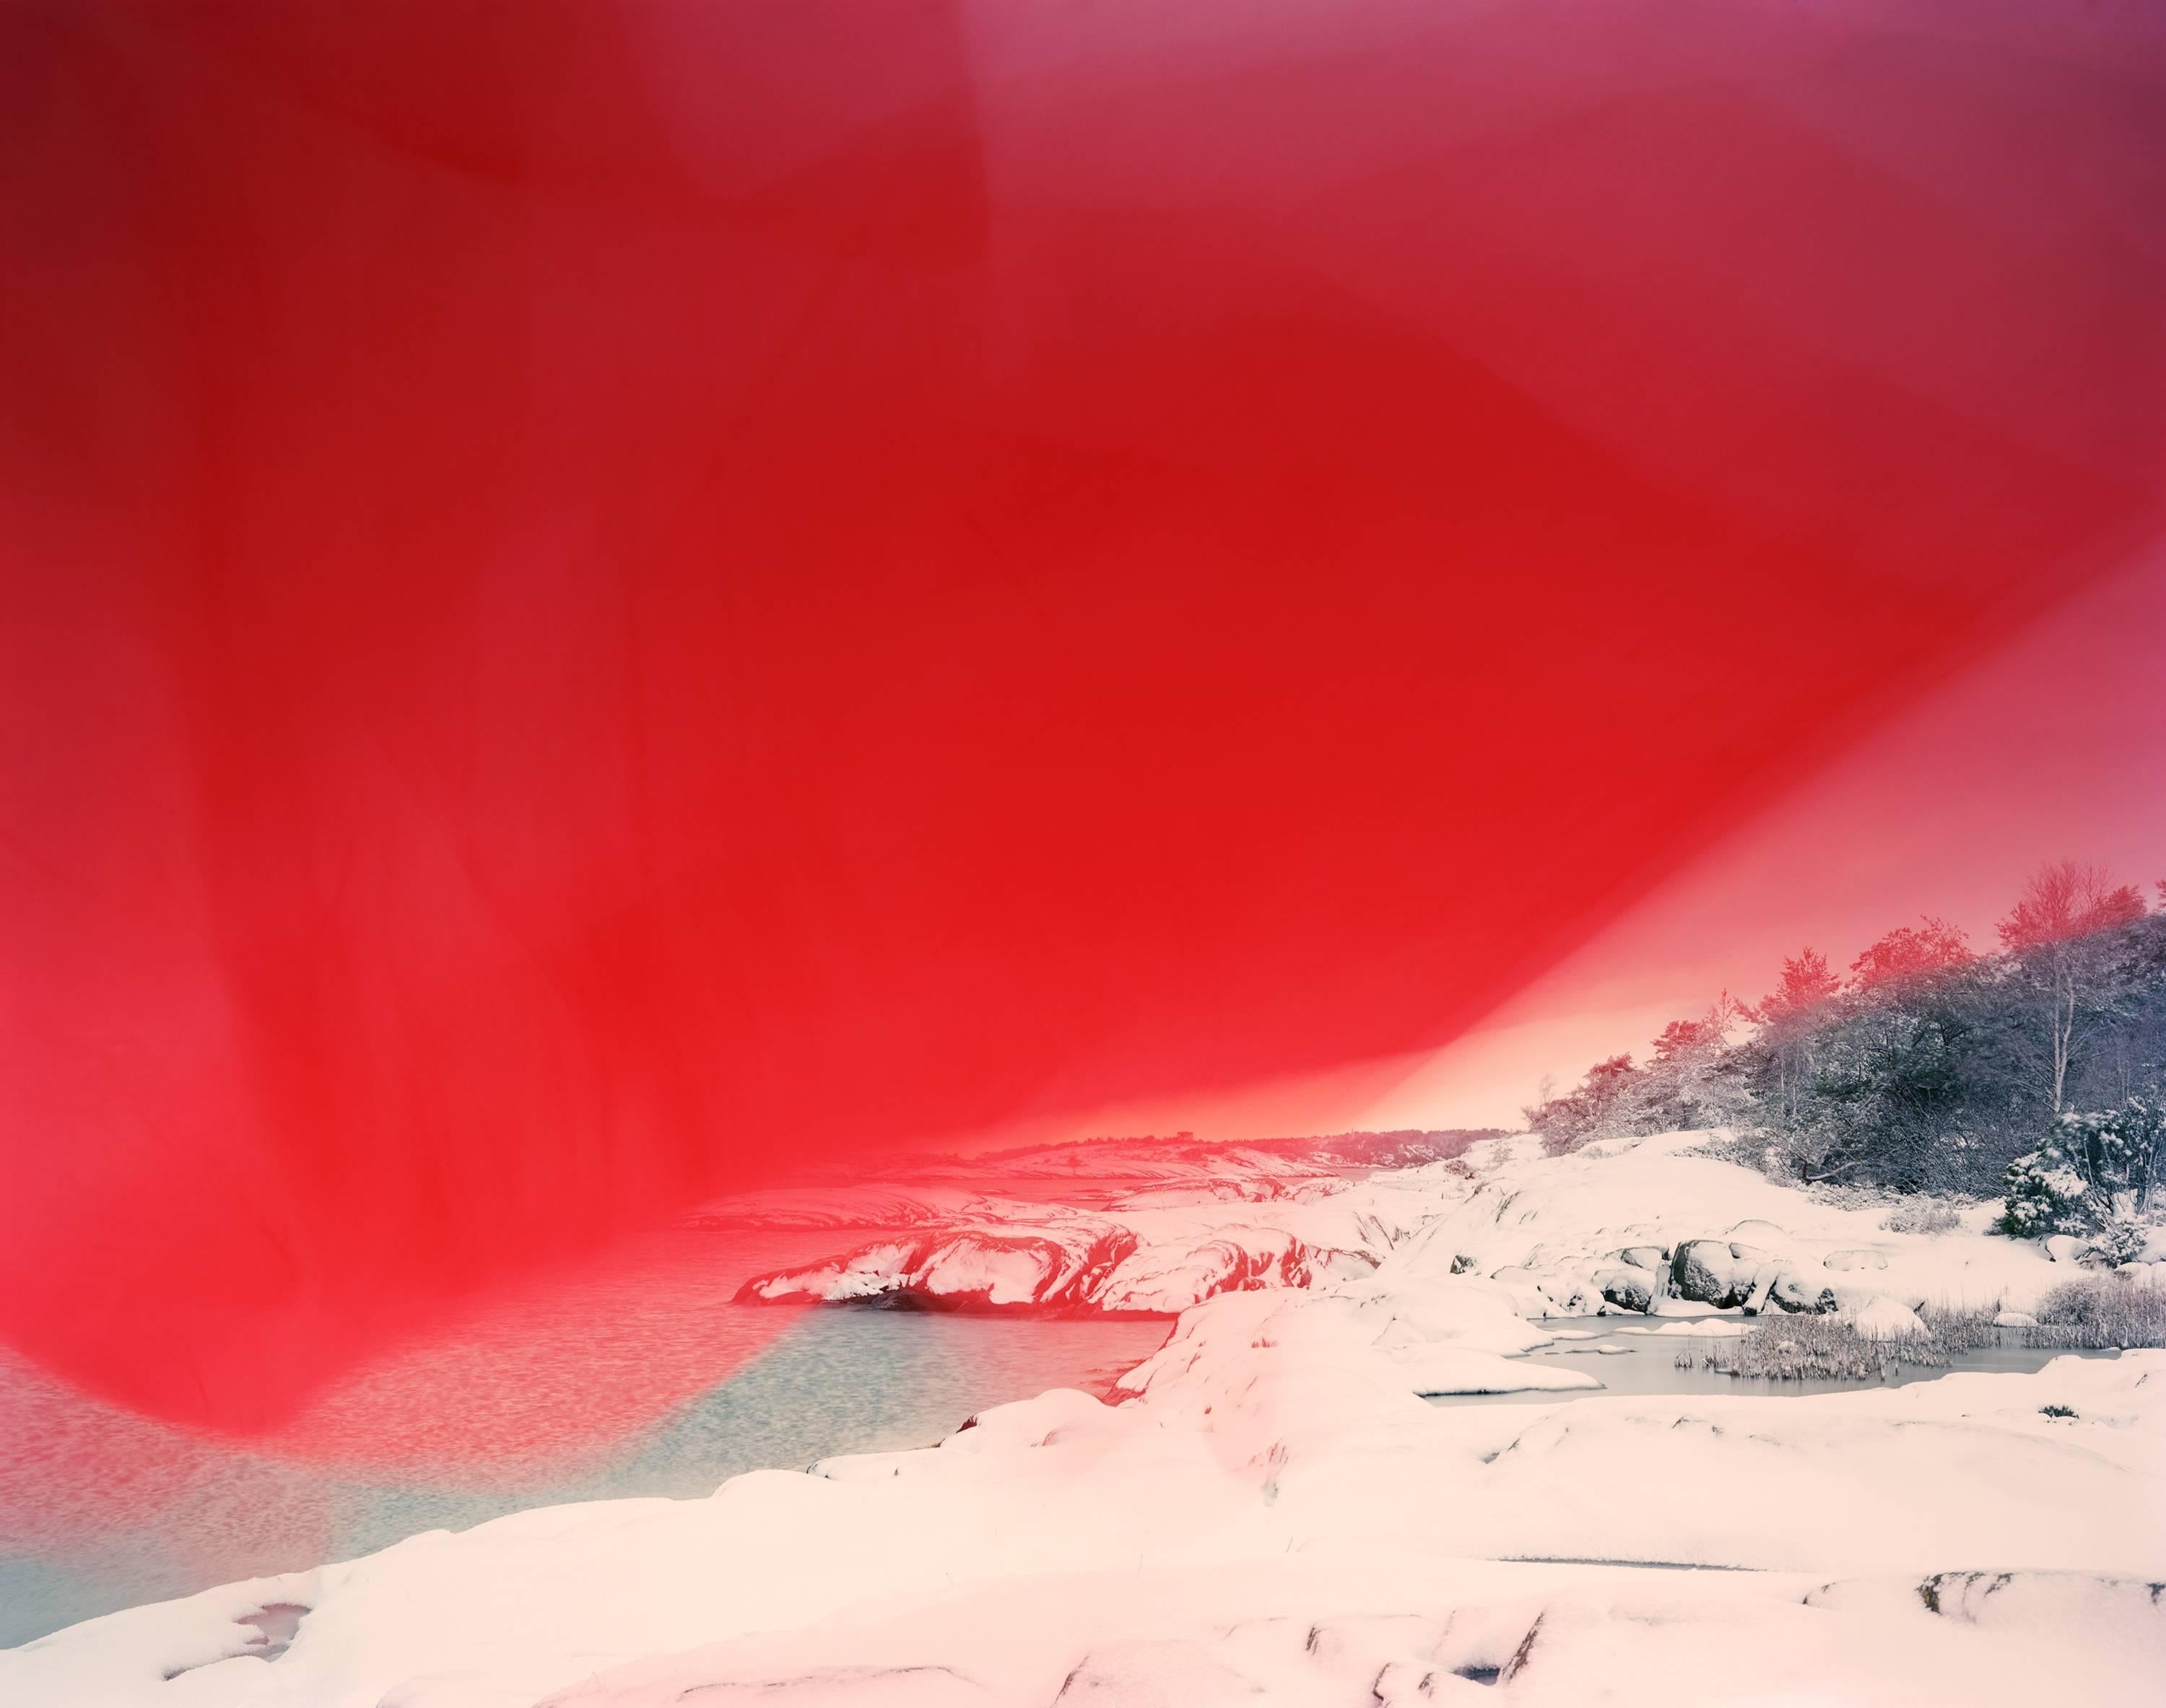 Ole Brodersen Landscape Photograph - Cloth and String 07 - red snowy abstract Scandinavian landscape photo